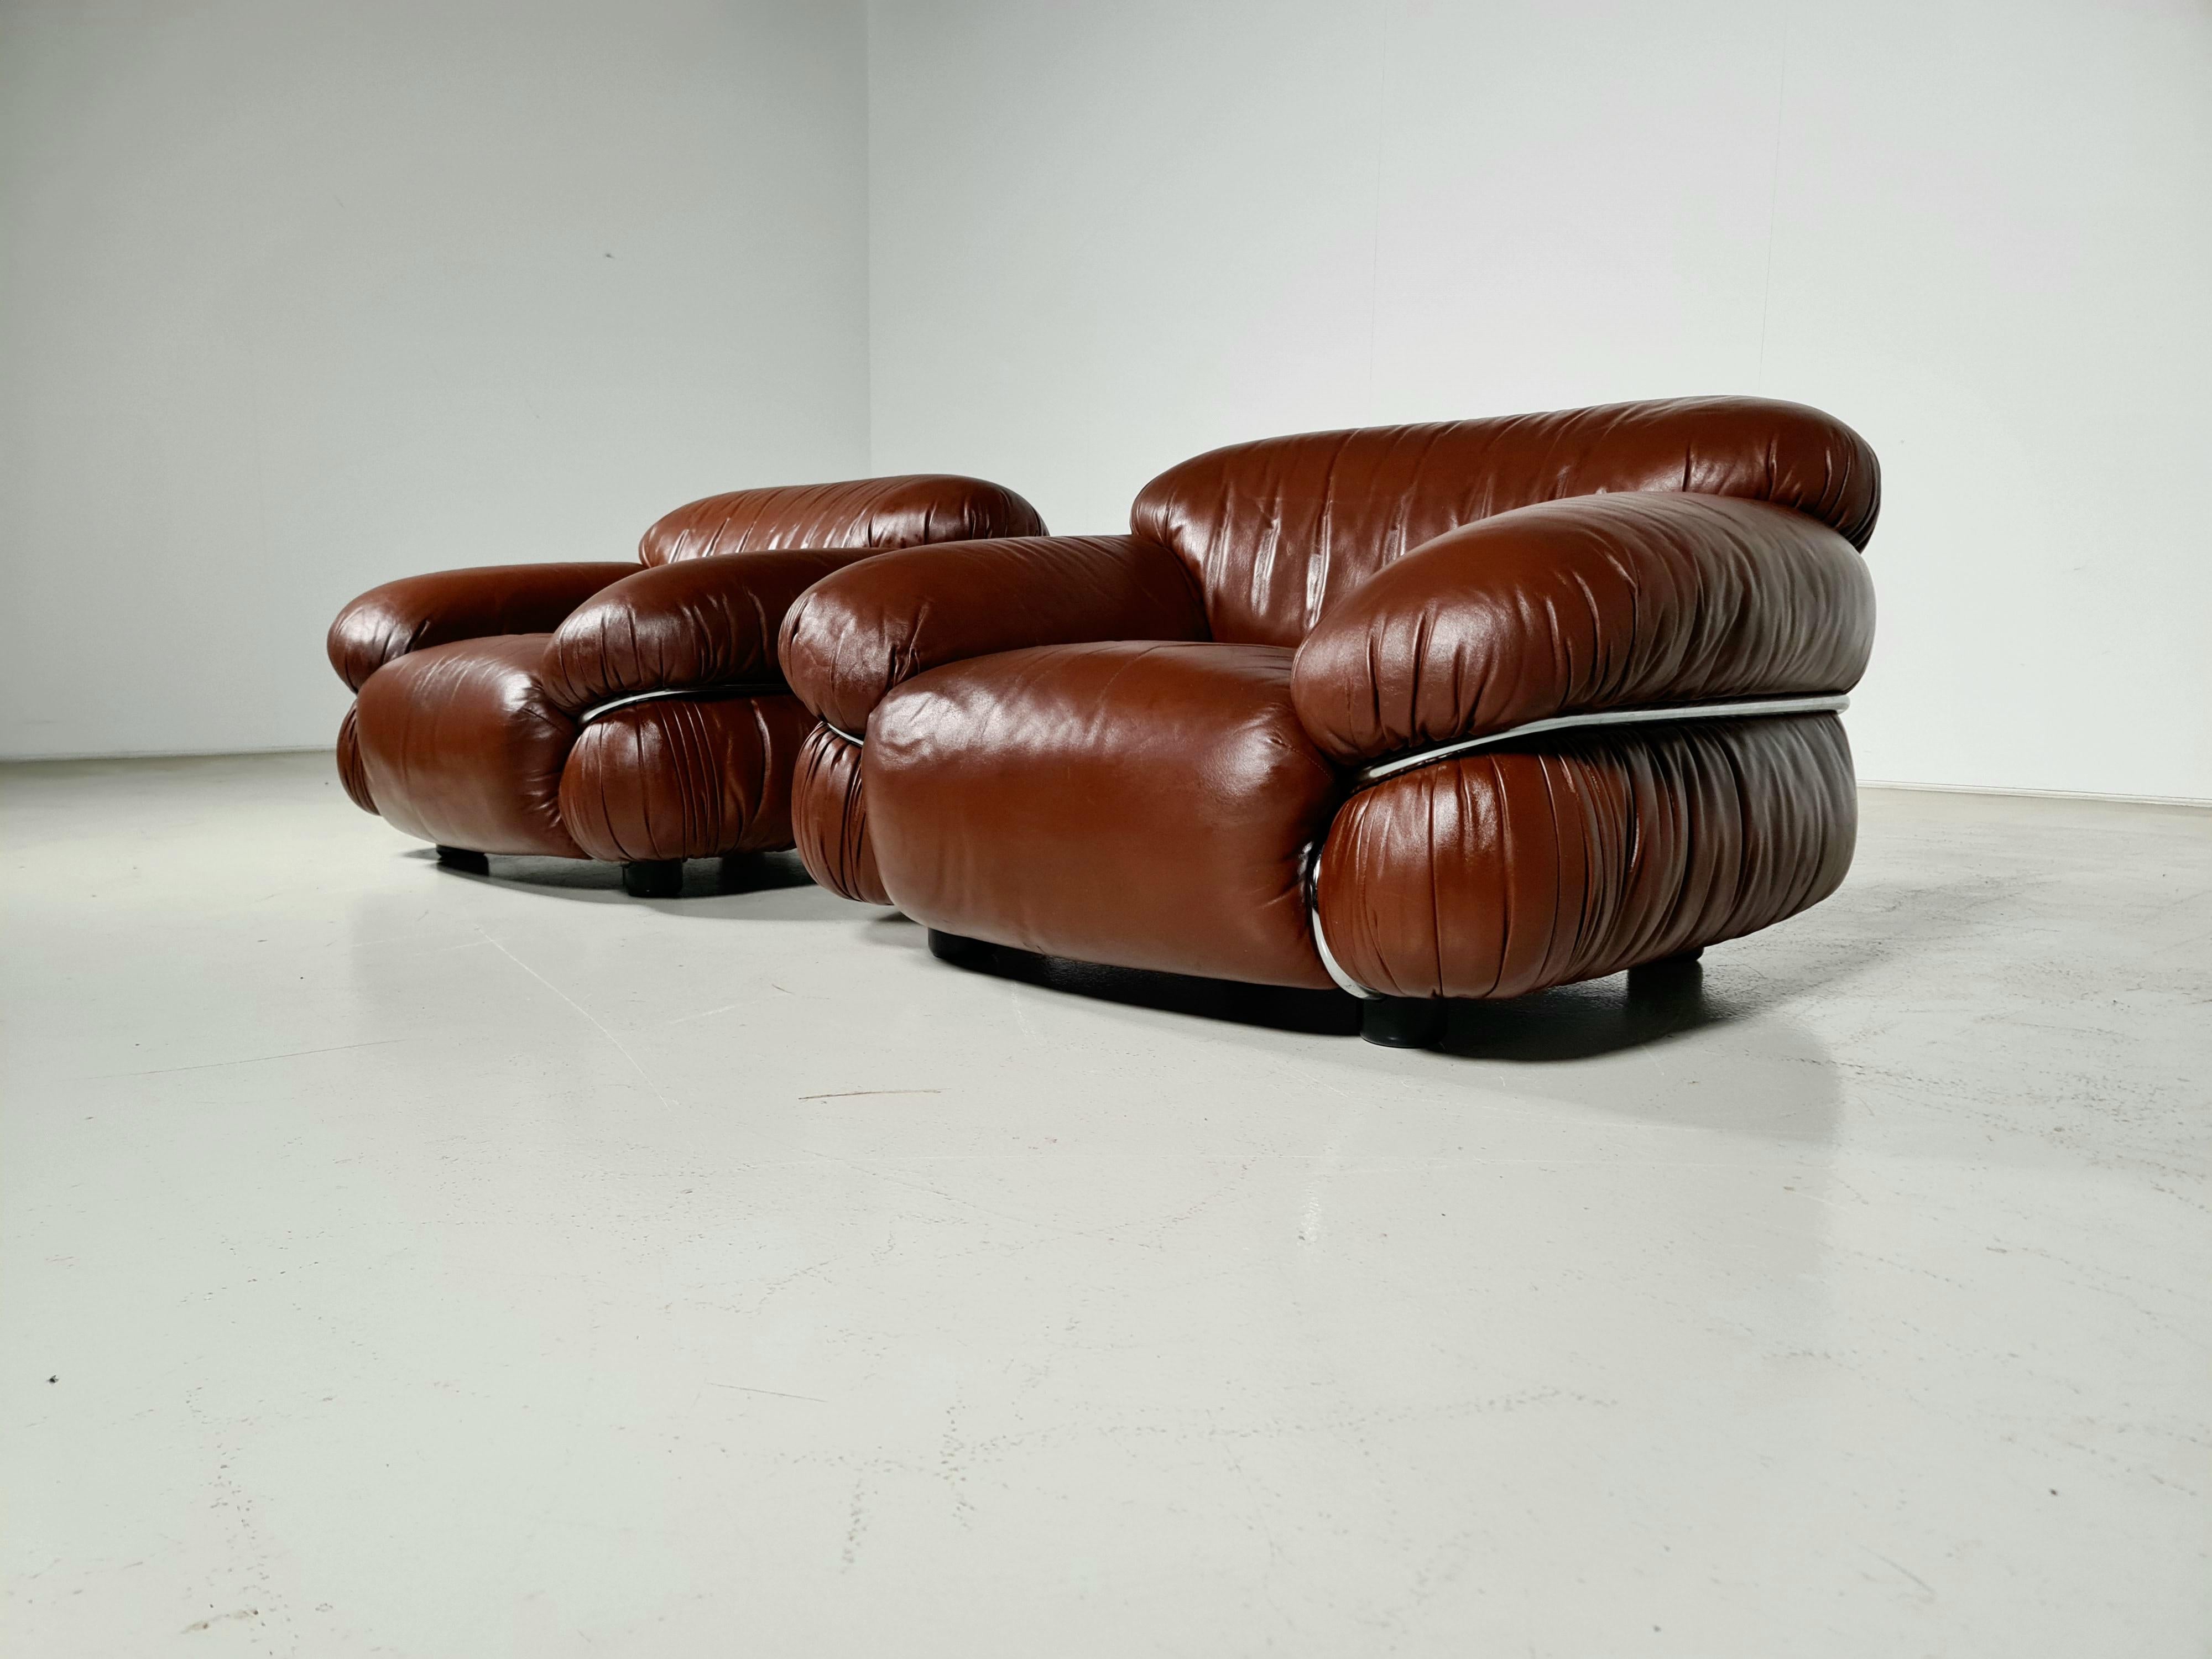 Set of 2 Sesann chairs designed by Gianfranco Frattini for Cassina, Italy 1970. The chairs are upholstered in the original brown leather and have a chrome tubular metal frame. Very comfortable seating and is in very good condition. Marked Cassina.